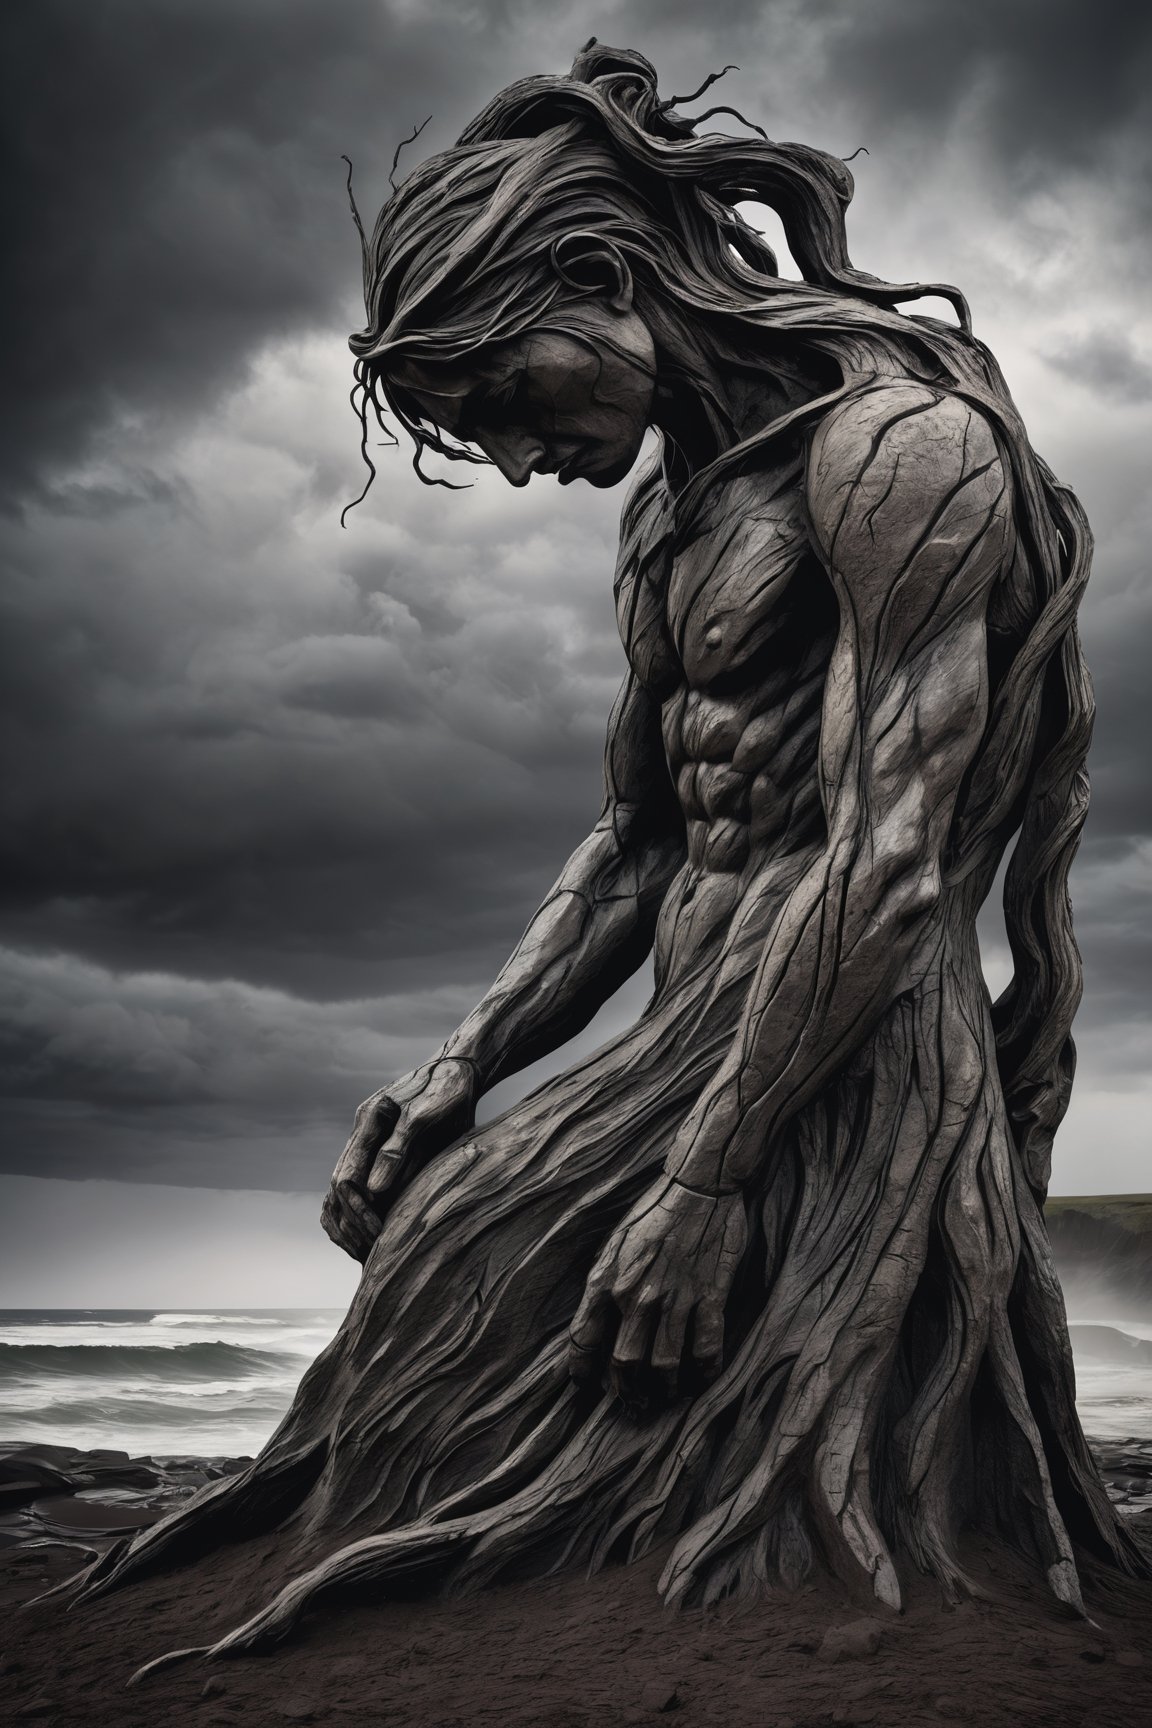 A solitary figure of resilience, carved from the very earth, enduring the wrath of nature's fury.

